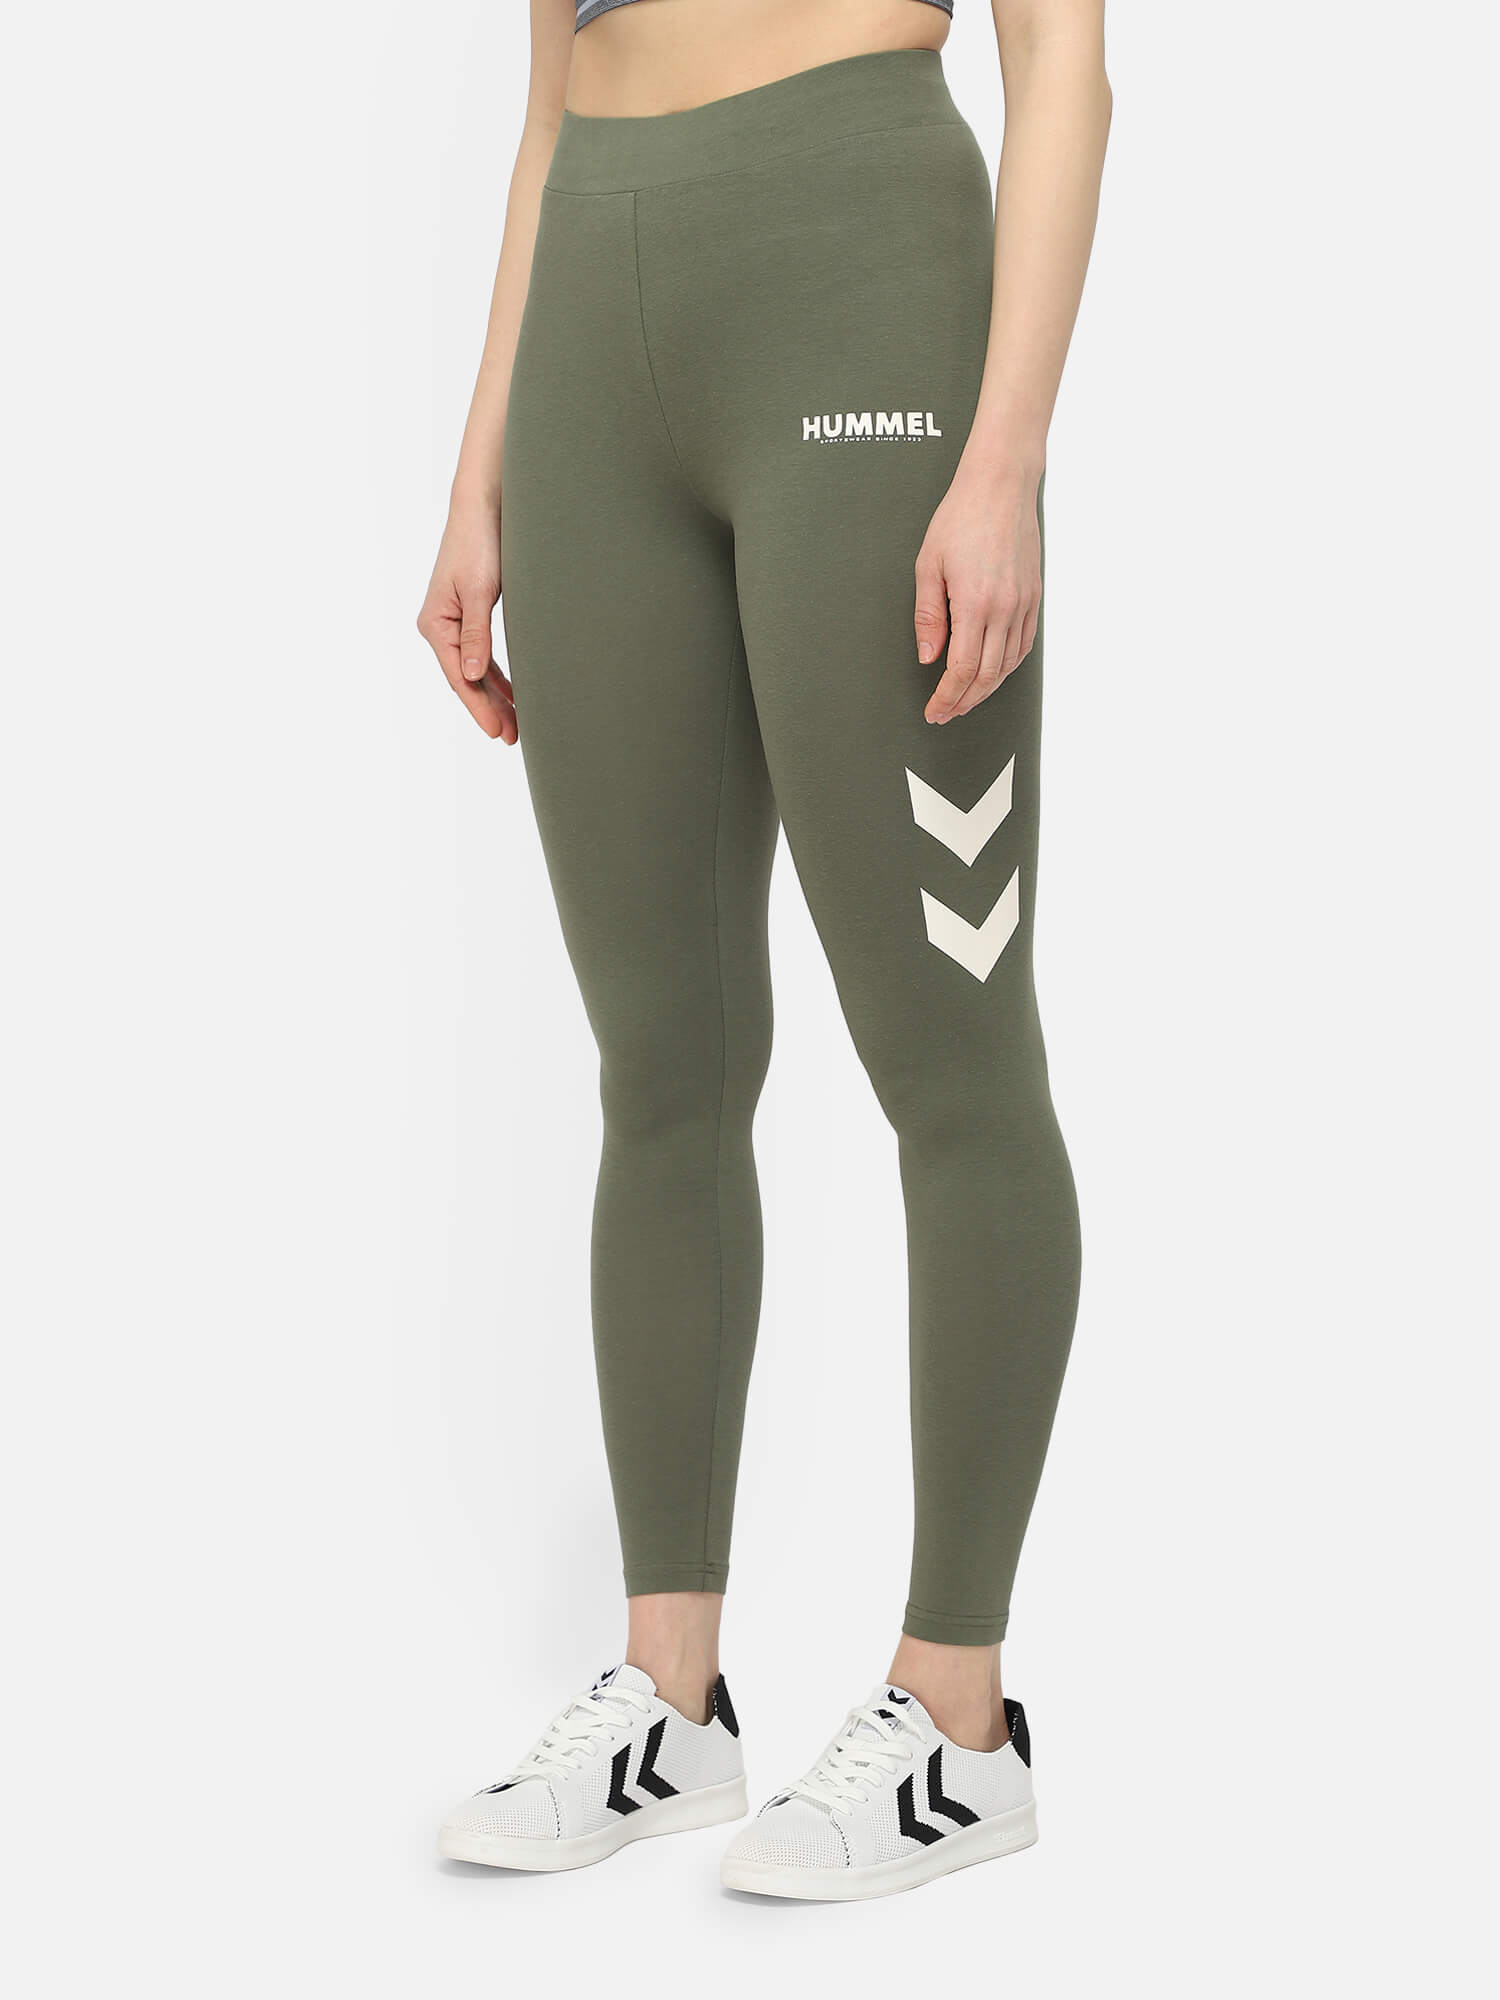 Legacy High Waist Green Tights for Women